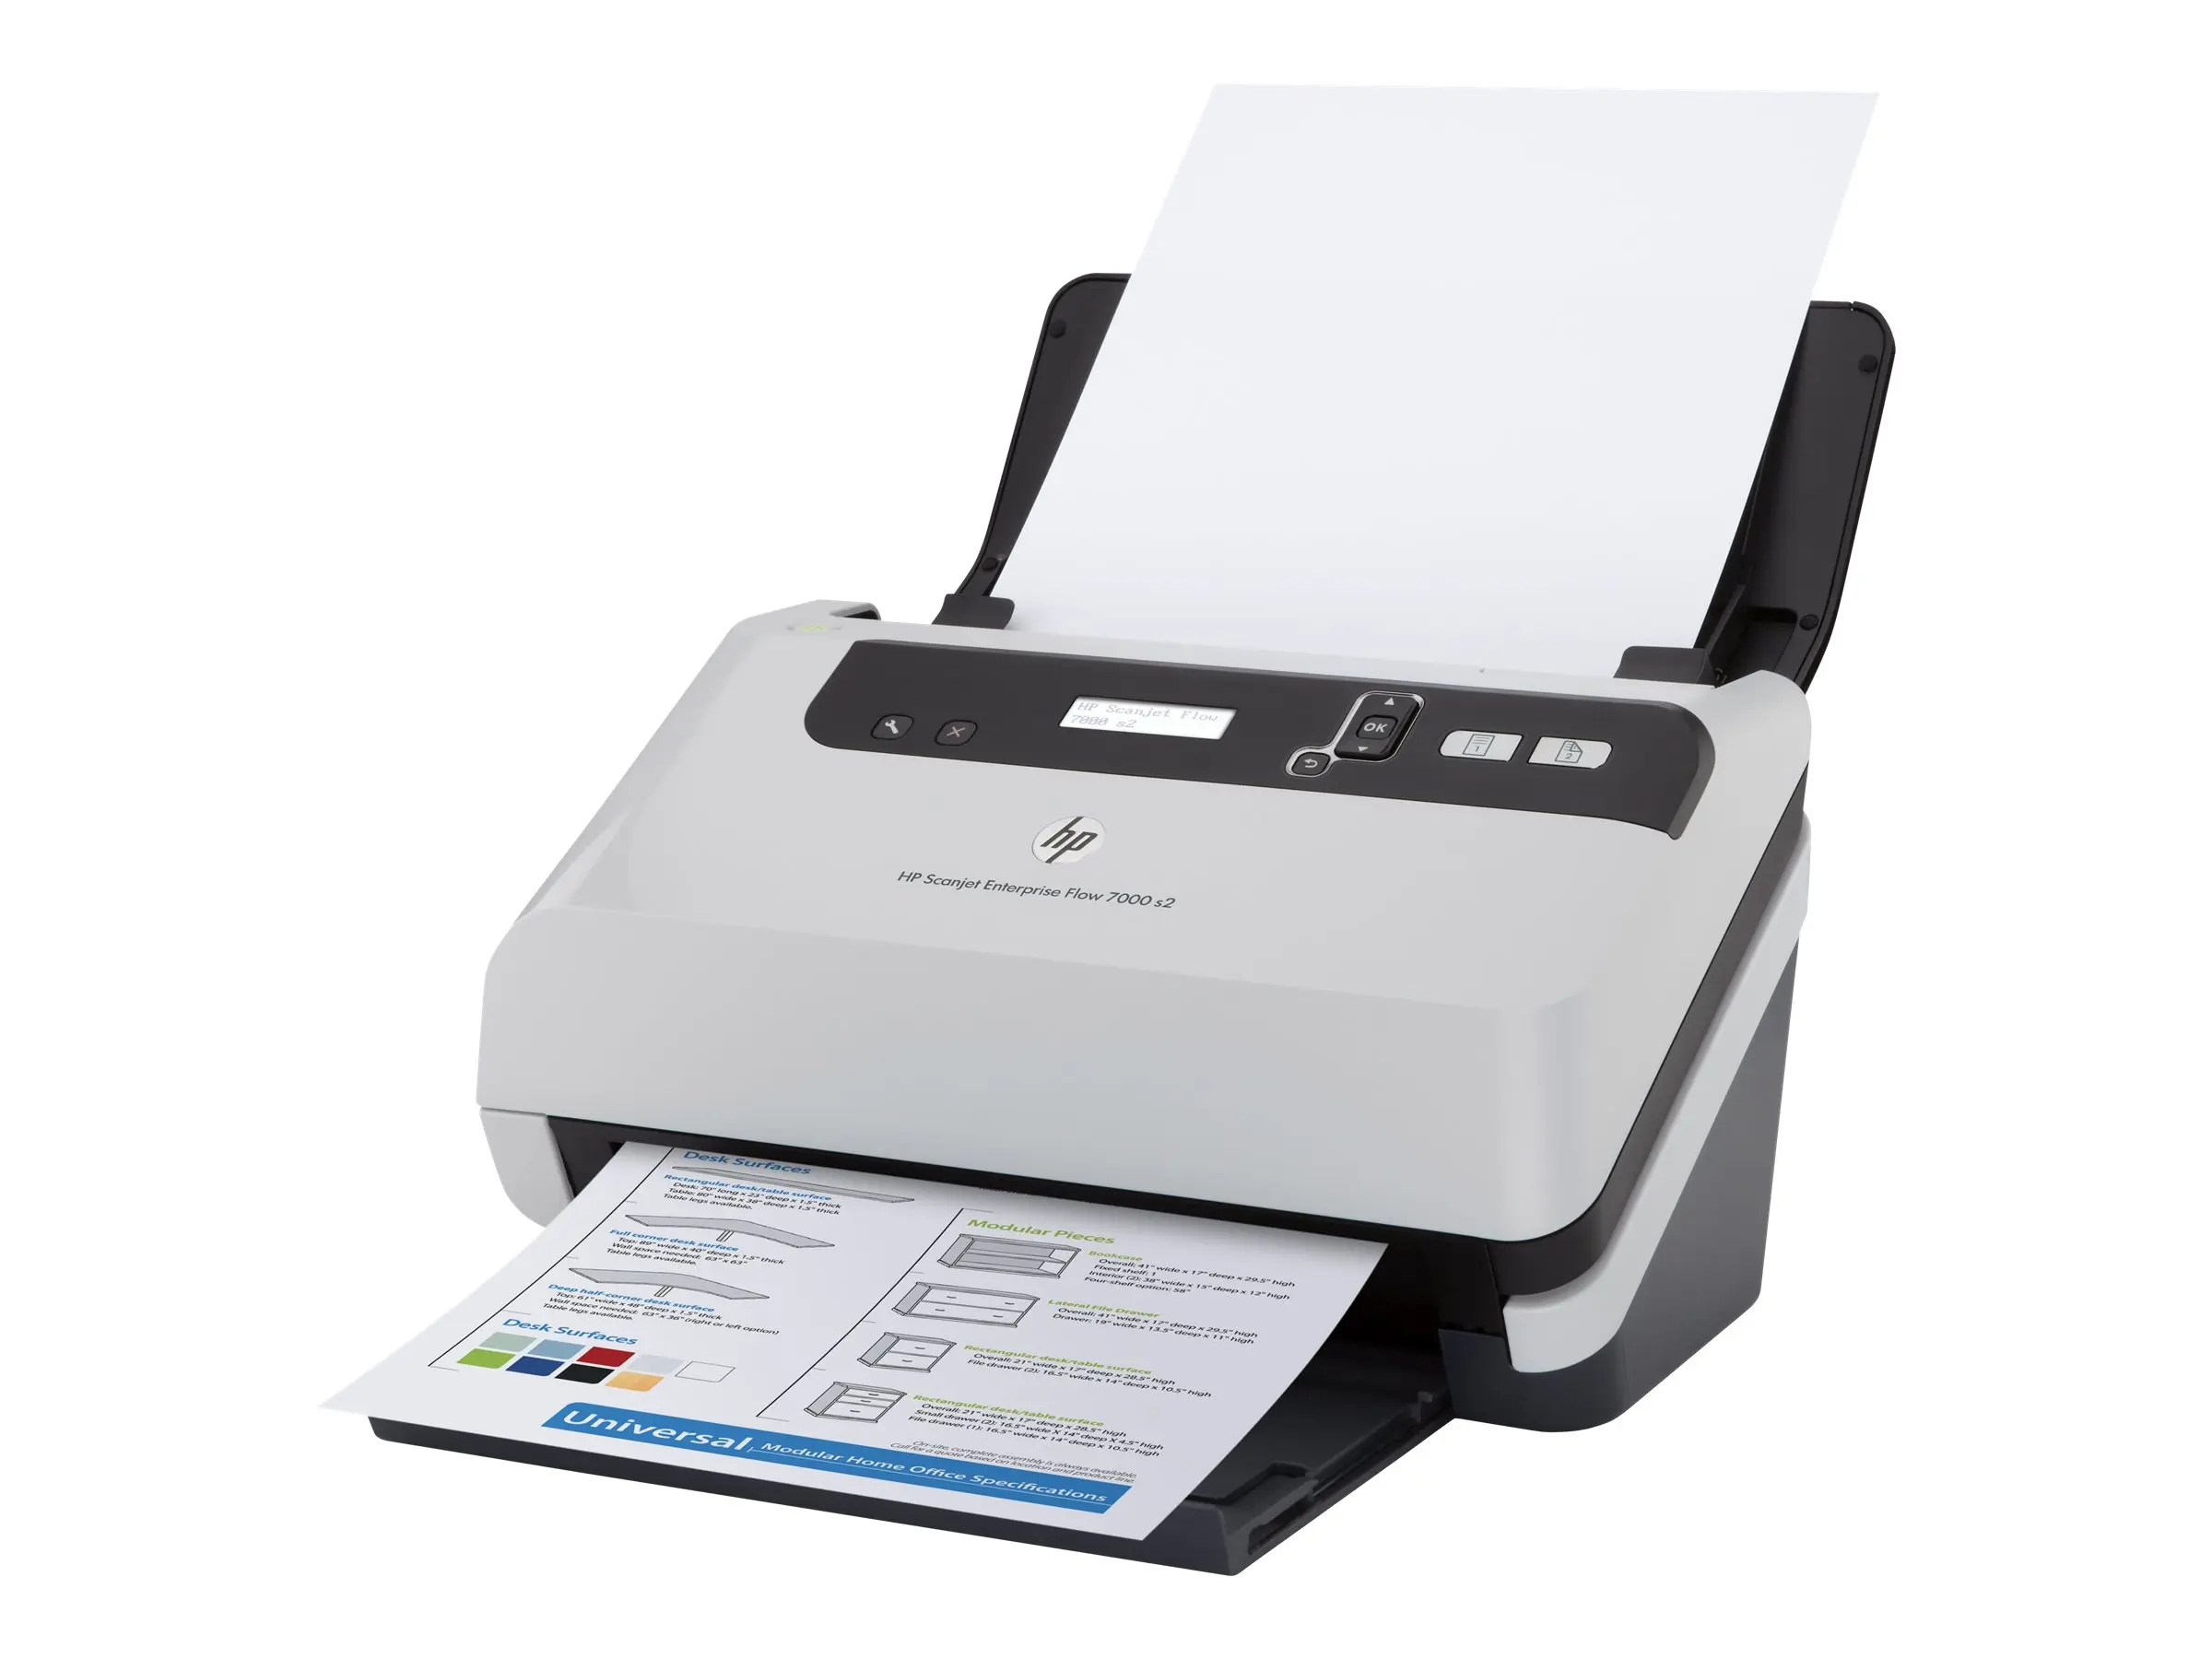 hewlett packard scanjet - How do I scan with HP ScanJet